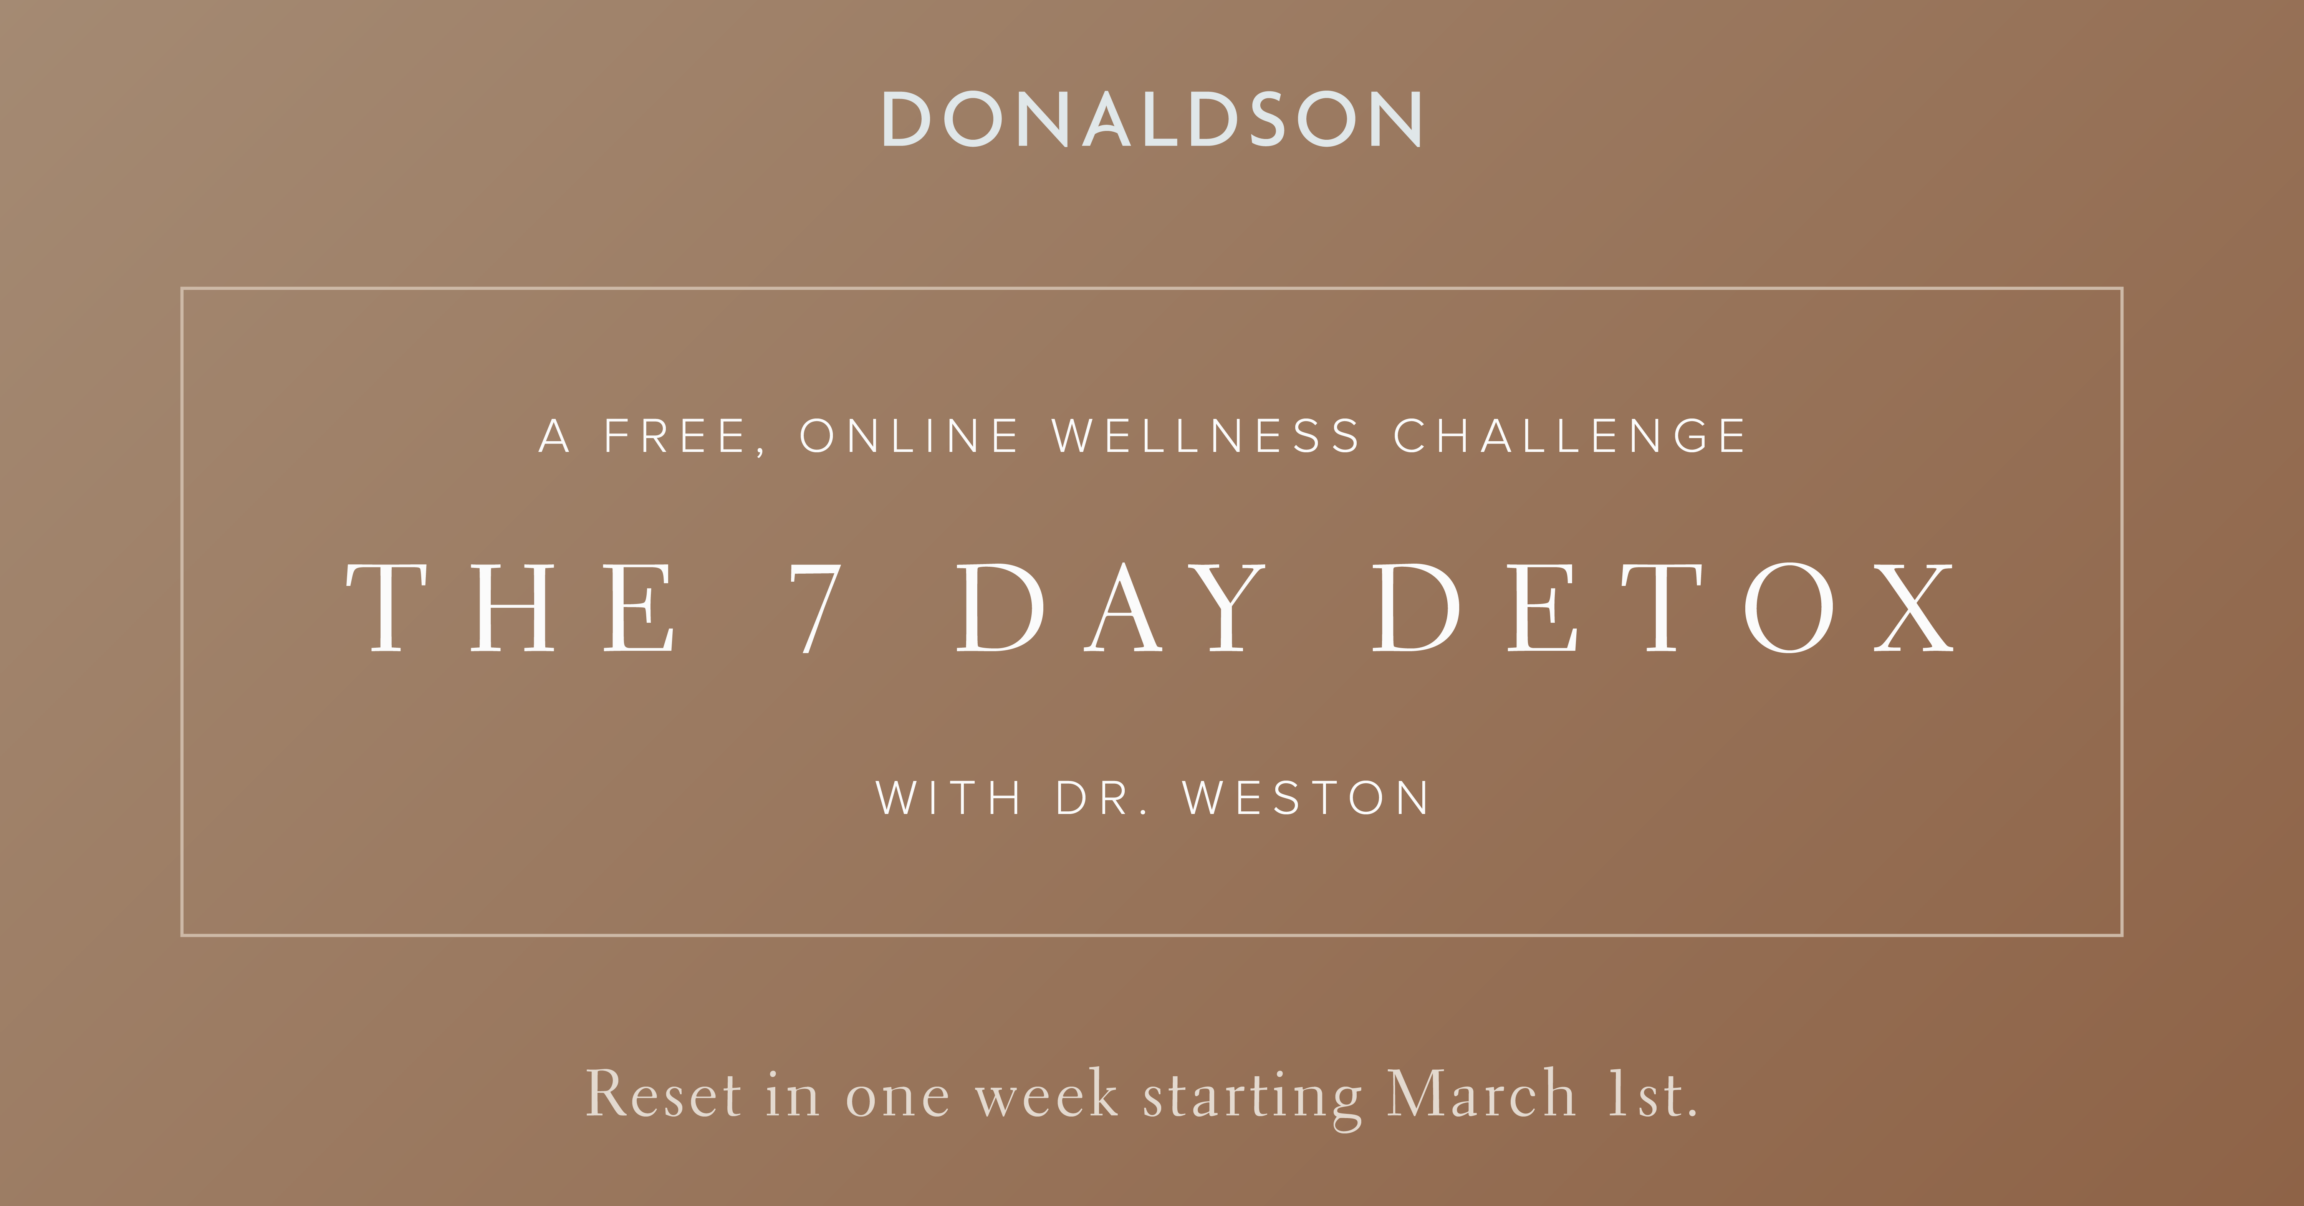 The 7 Day Detox